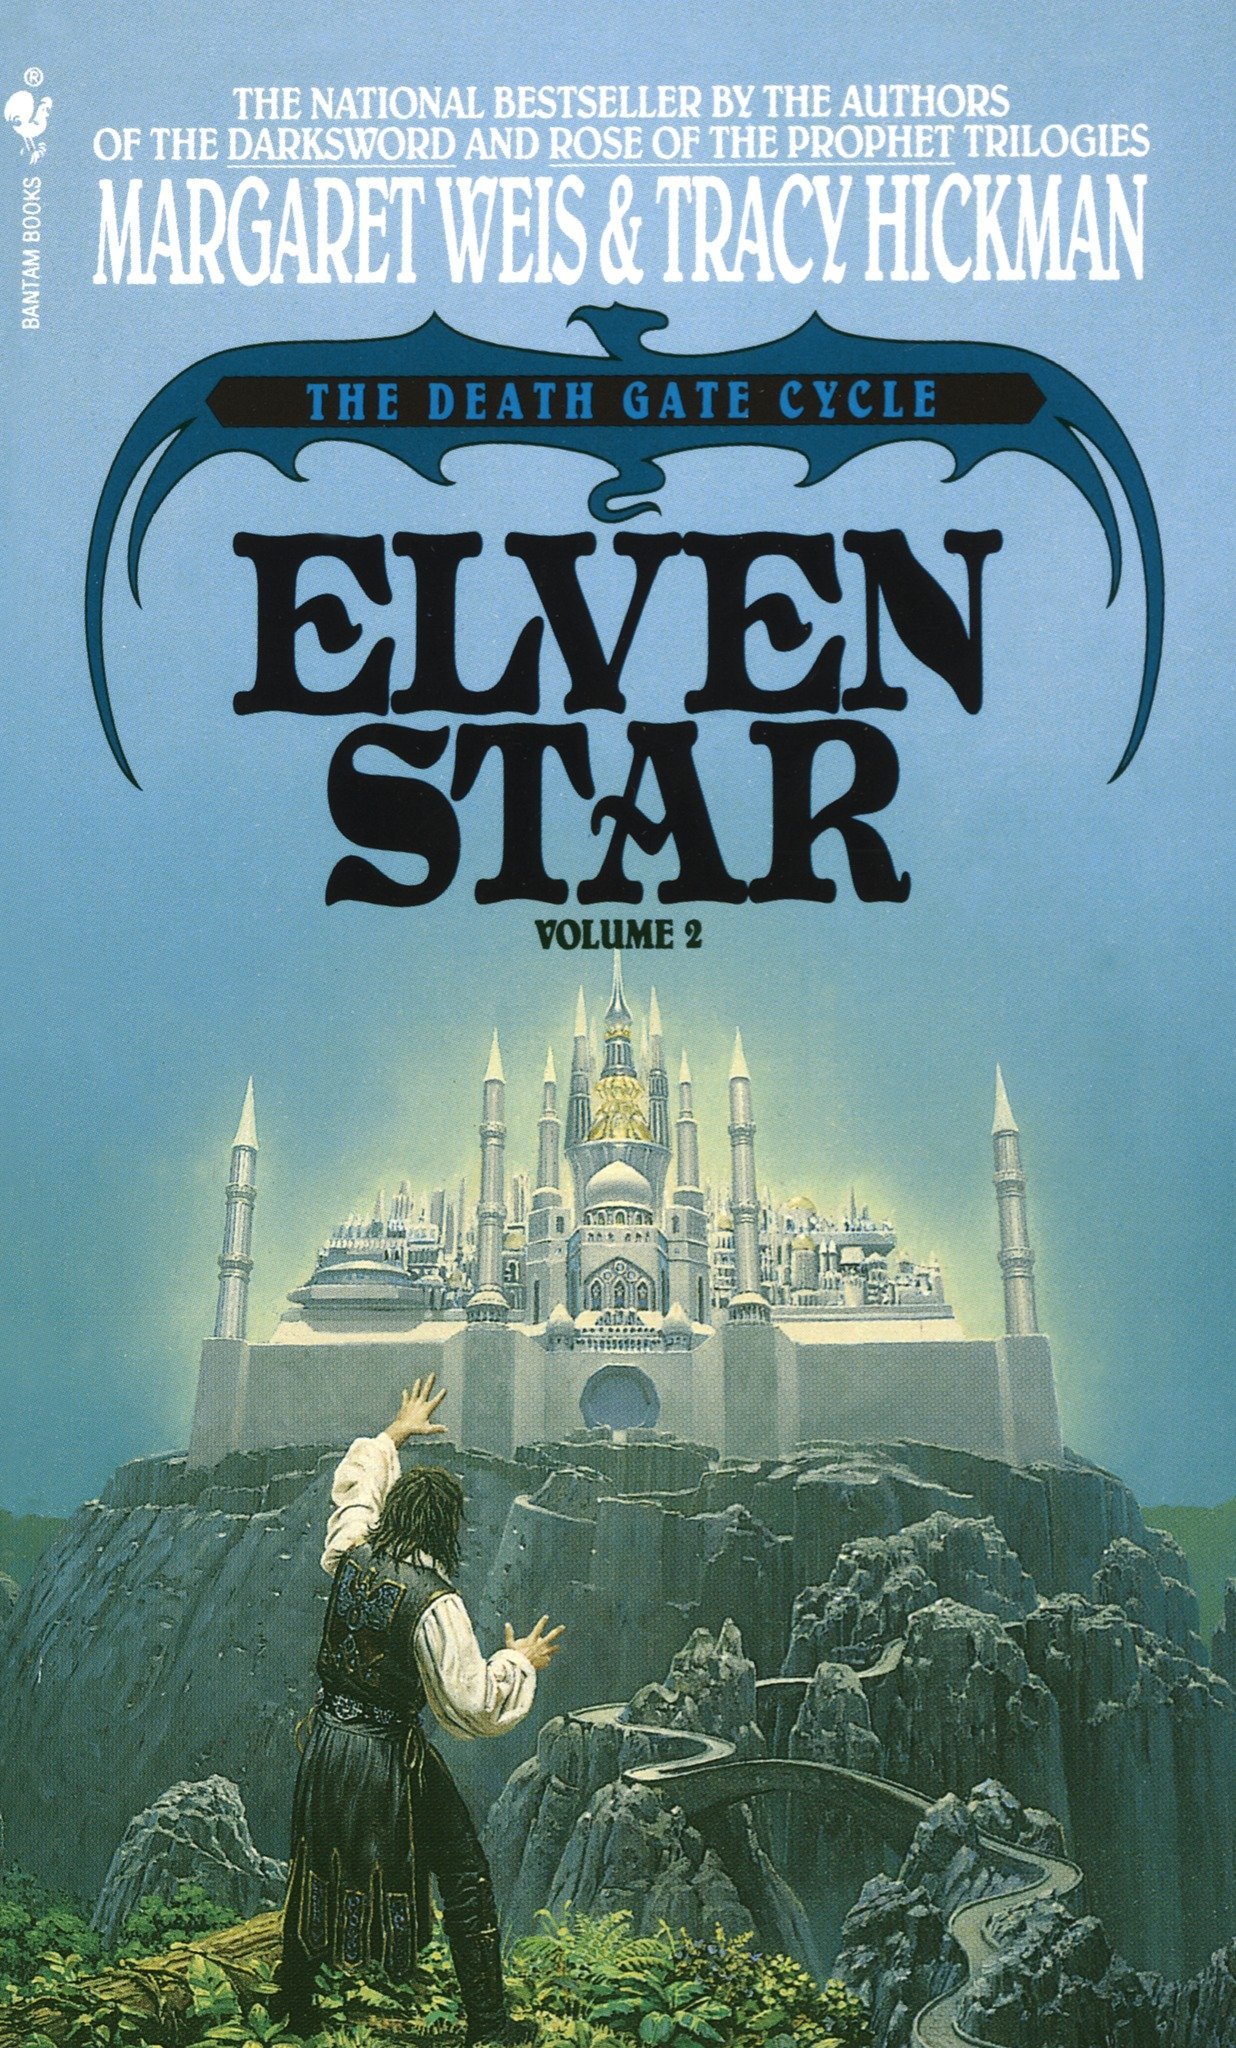 Elven star : The death gate cycle